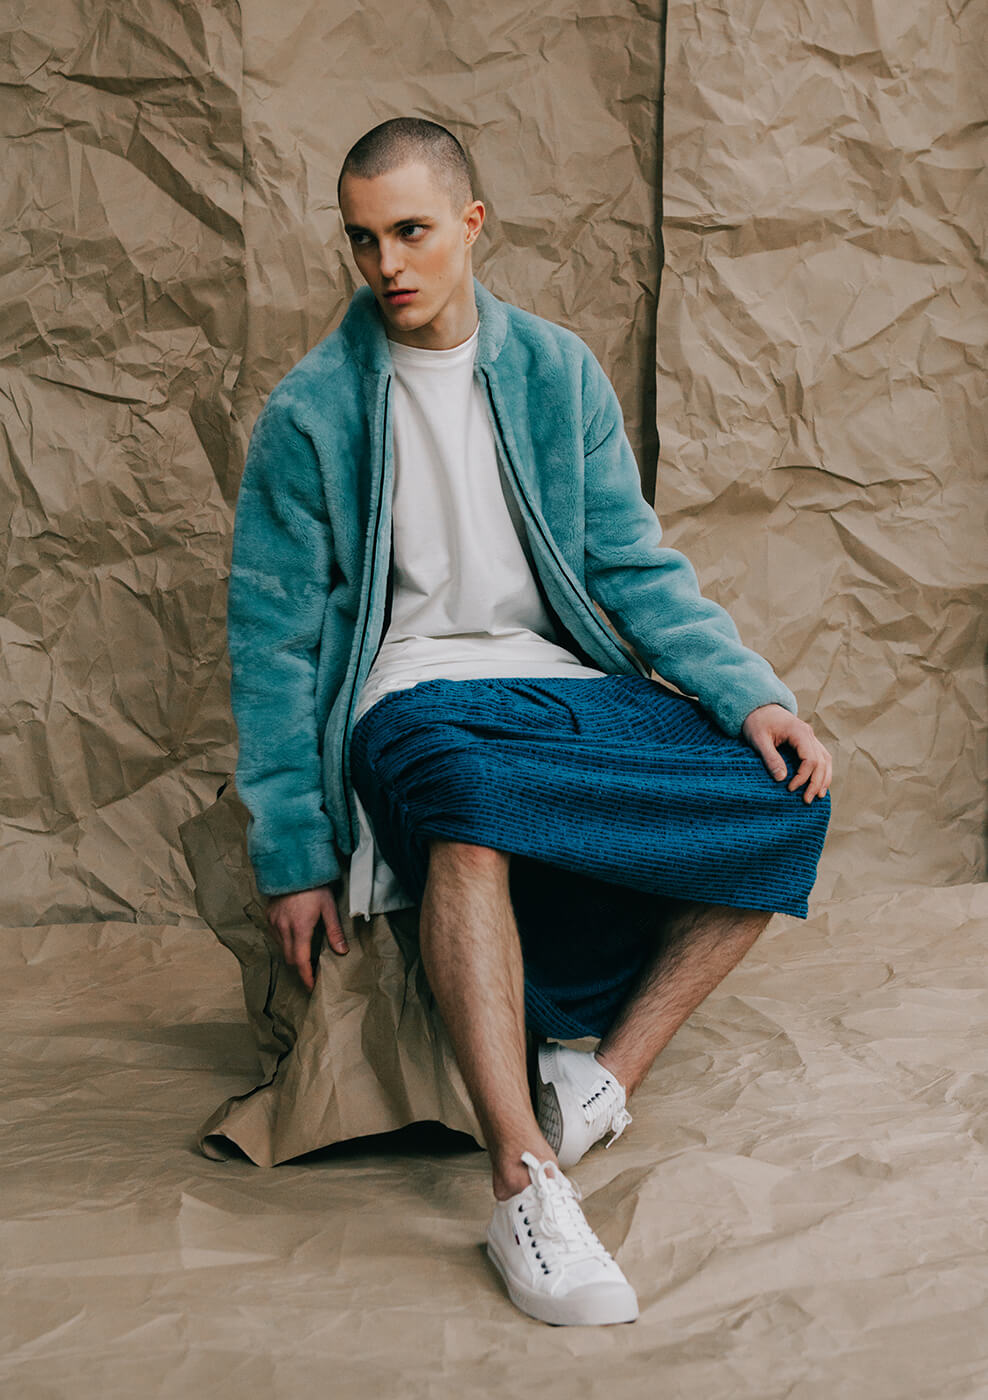 An editorial image of man sitting in the studio wearing colorful designer clothing